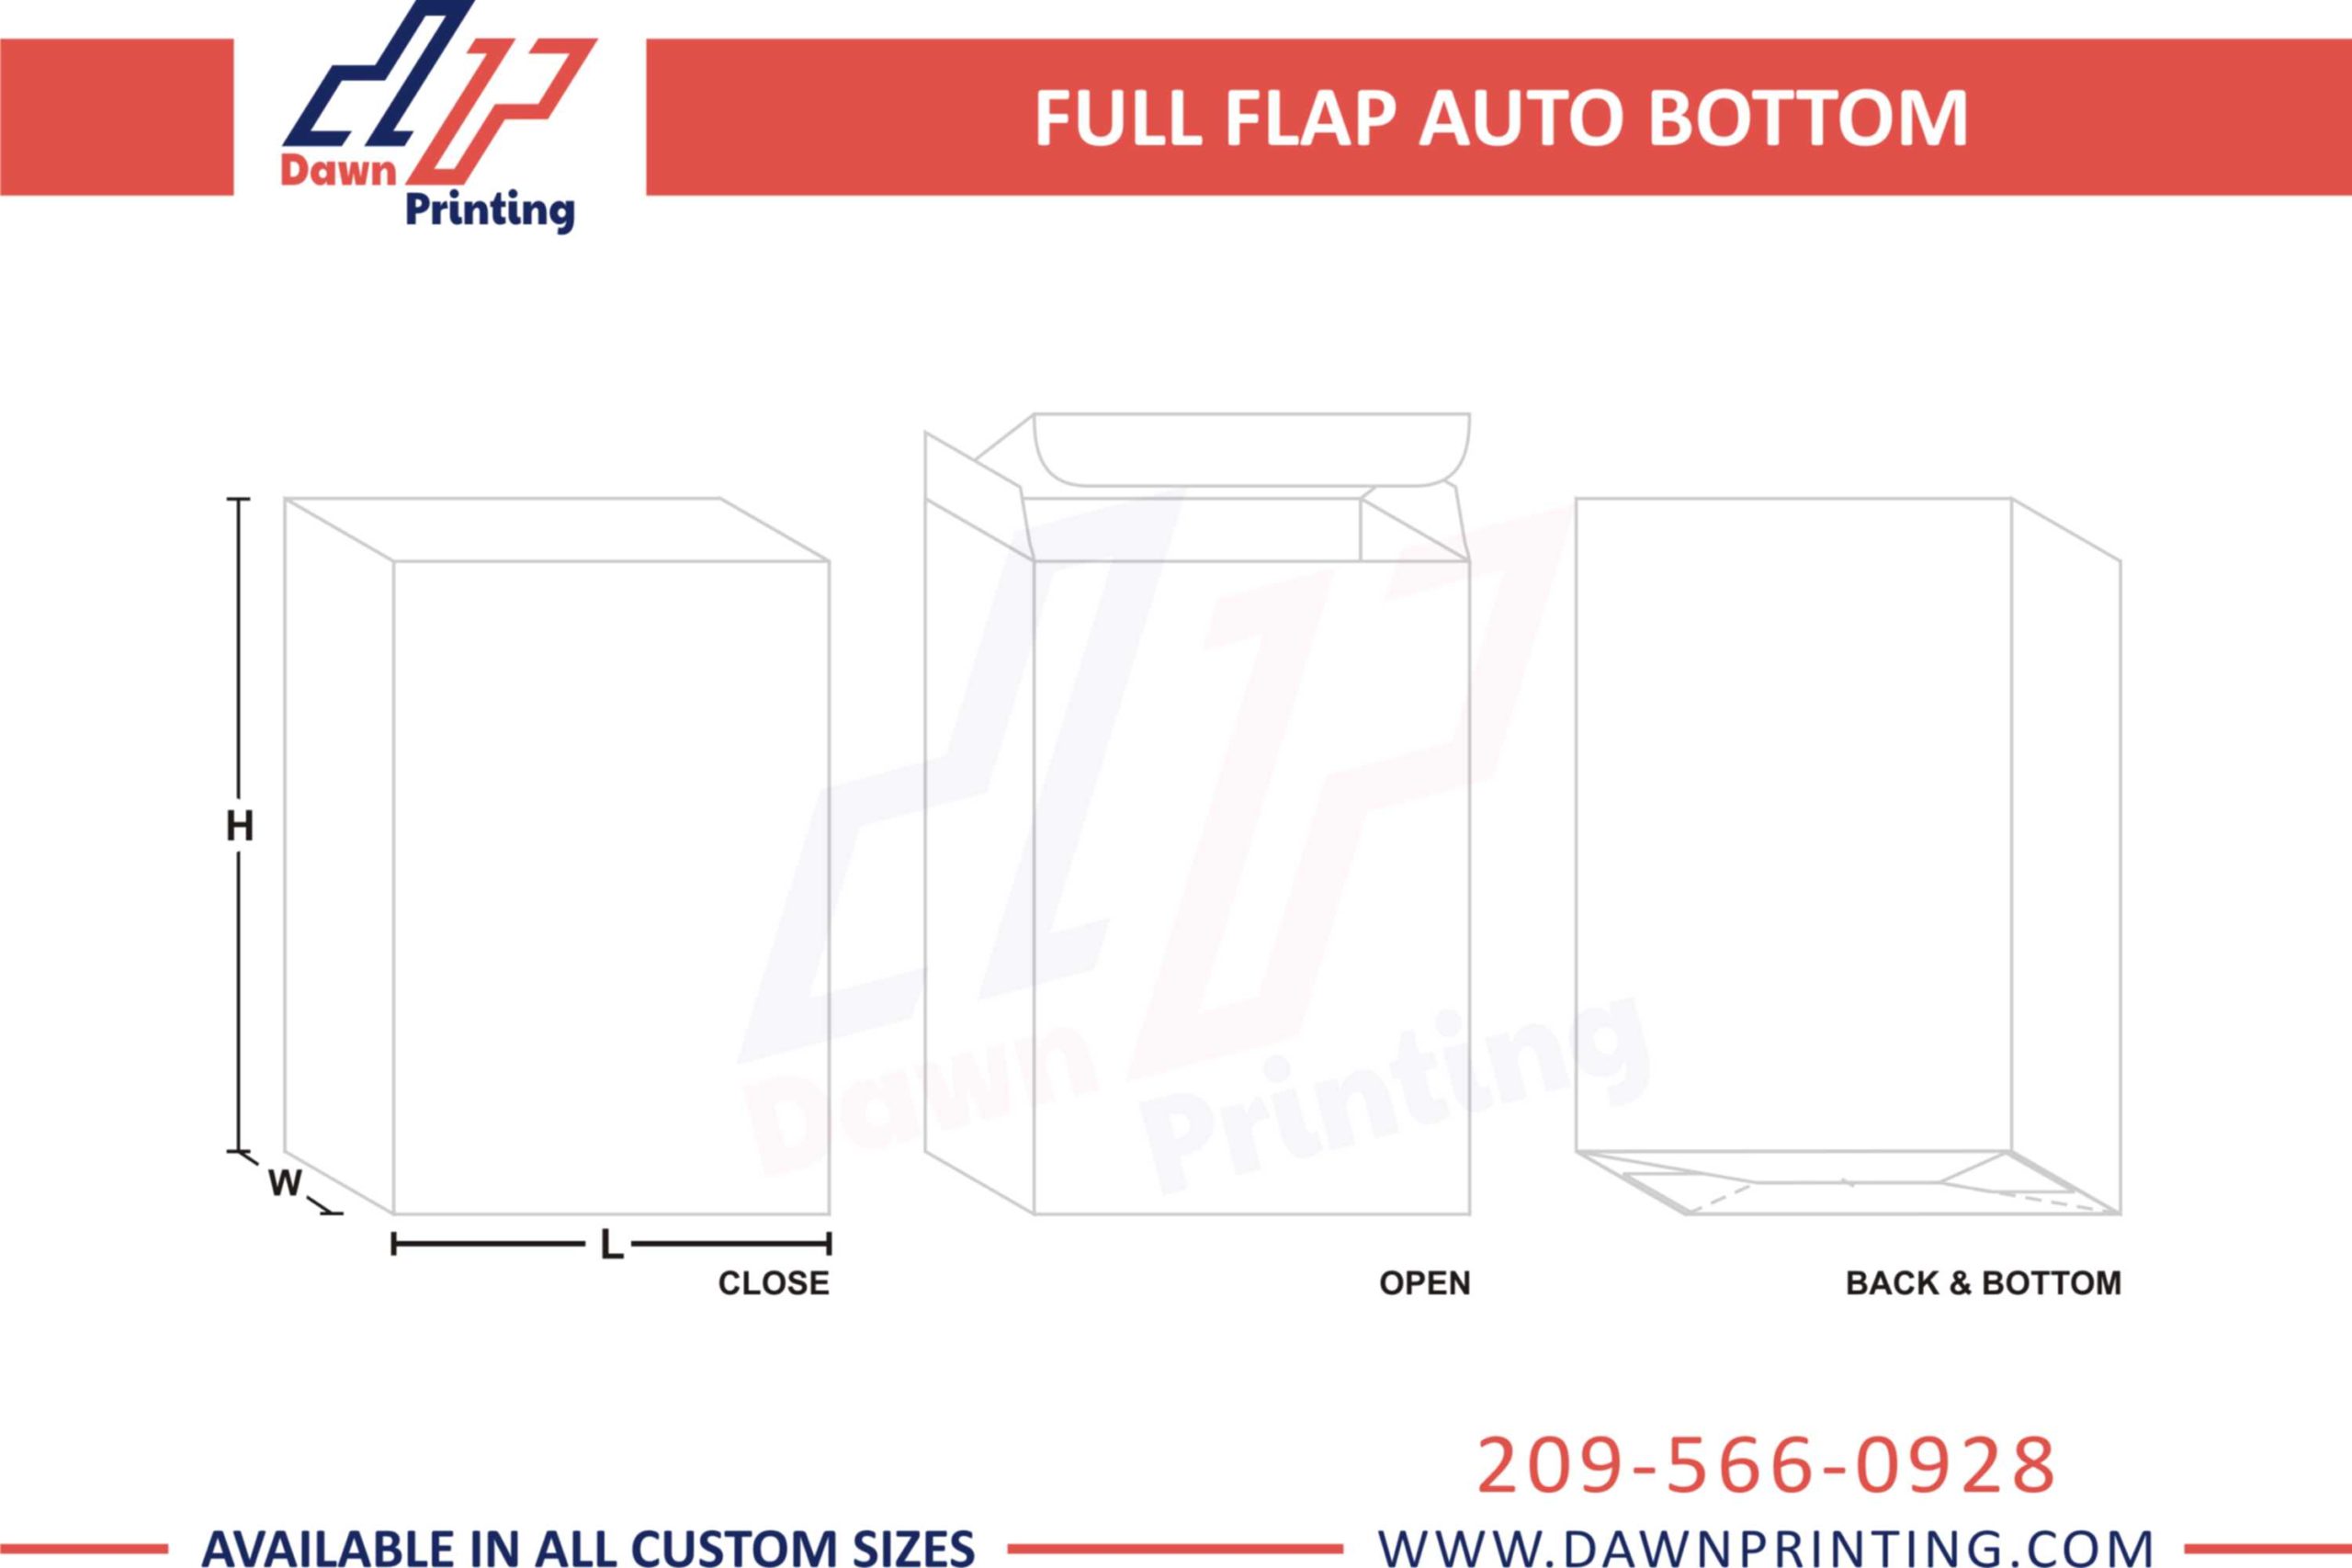 Full Flap Auto Bottom Mock Up Boxes - Dawn Printing